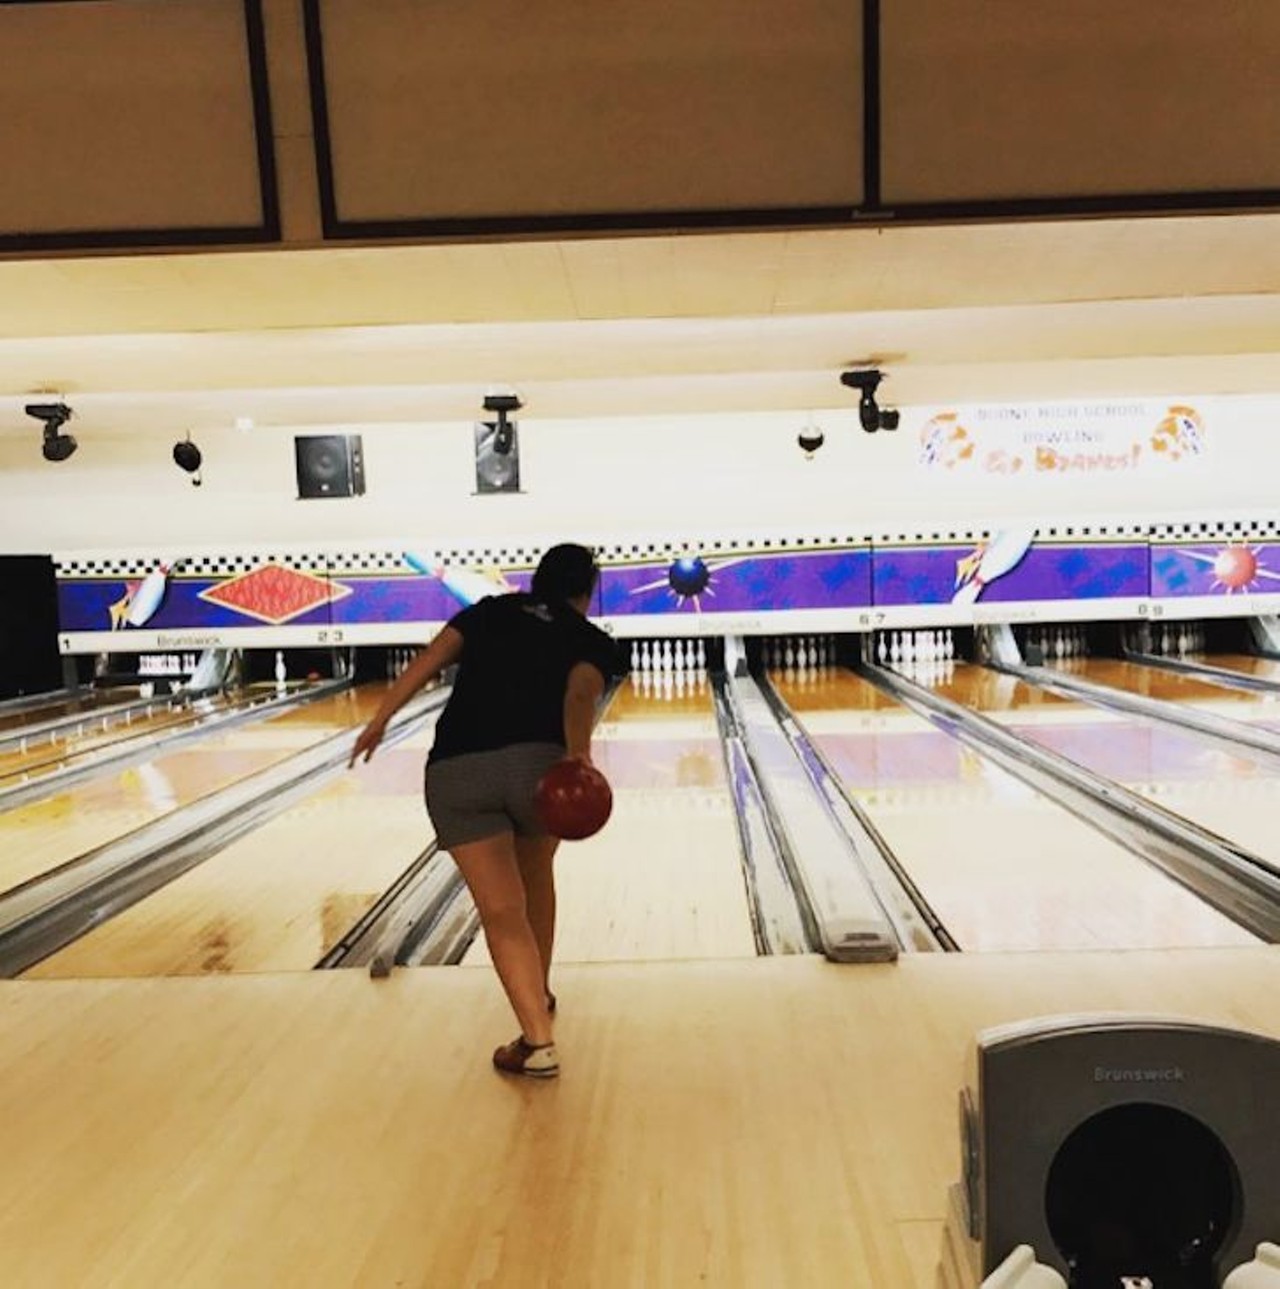  Aim for some strikes at the bowling lanes 
400 N. Primrose Drive, 407-894-0361, coloniallanes.net 
Tuesday seems the day to hit up Colonial Lanes with specials like $8 all you can bowl on Tuesdays, $8 cheese pizza, and $8 beer buckets. From Monday-Friday, games are $2.25 from 3-6 p.m., making for some good entertainment that goes easy on your wallet.